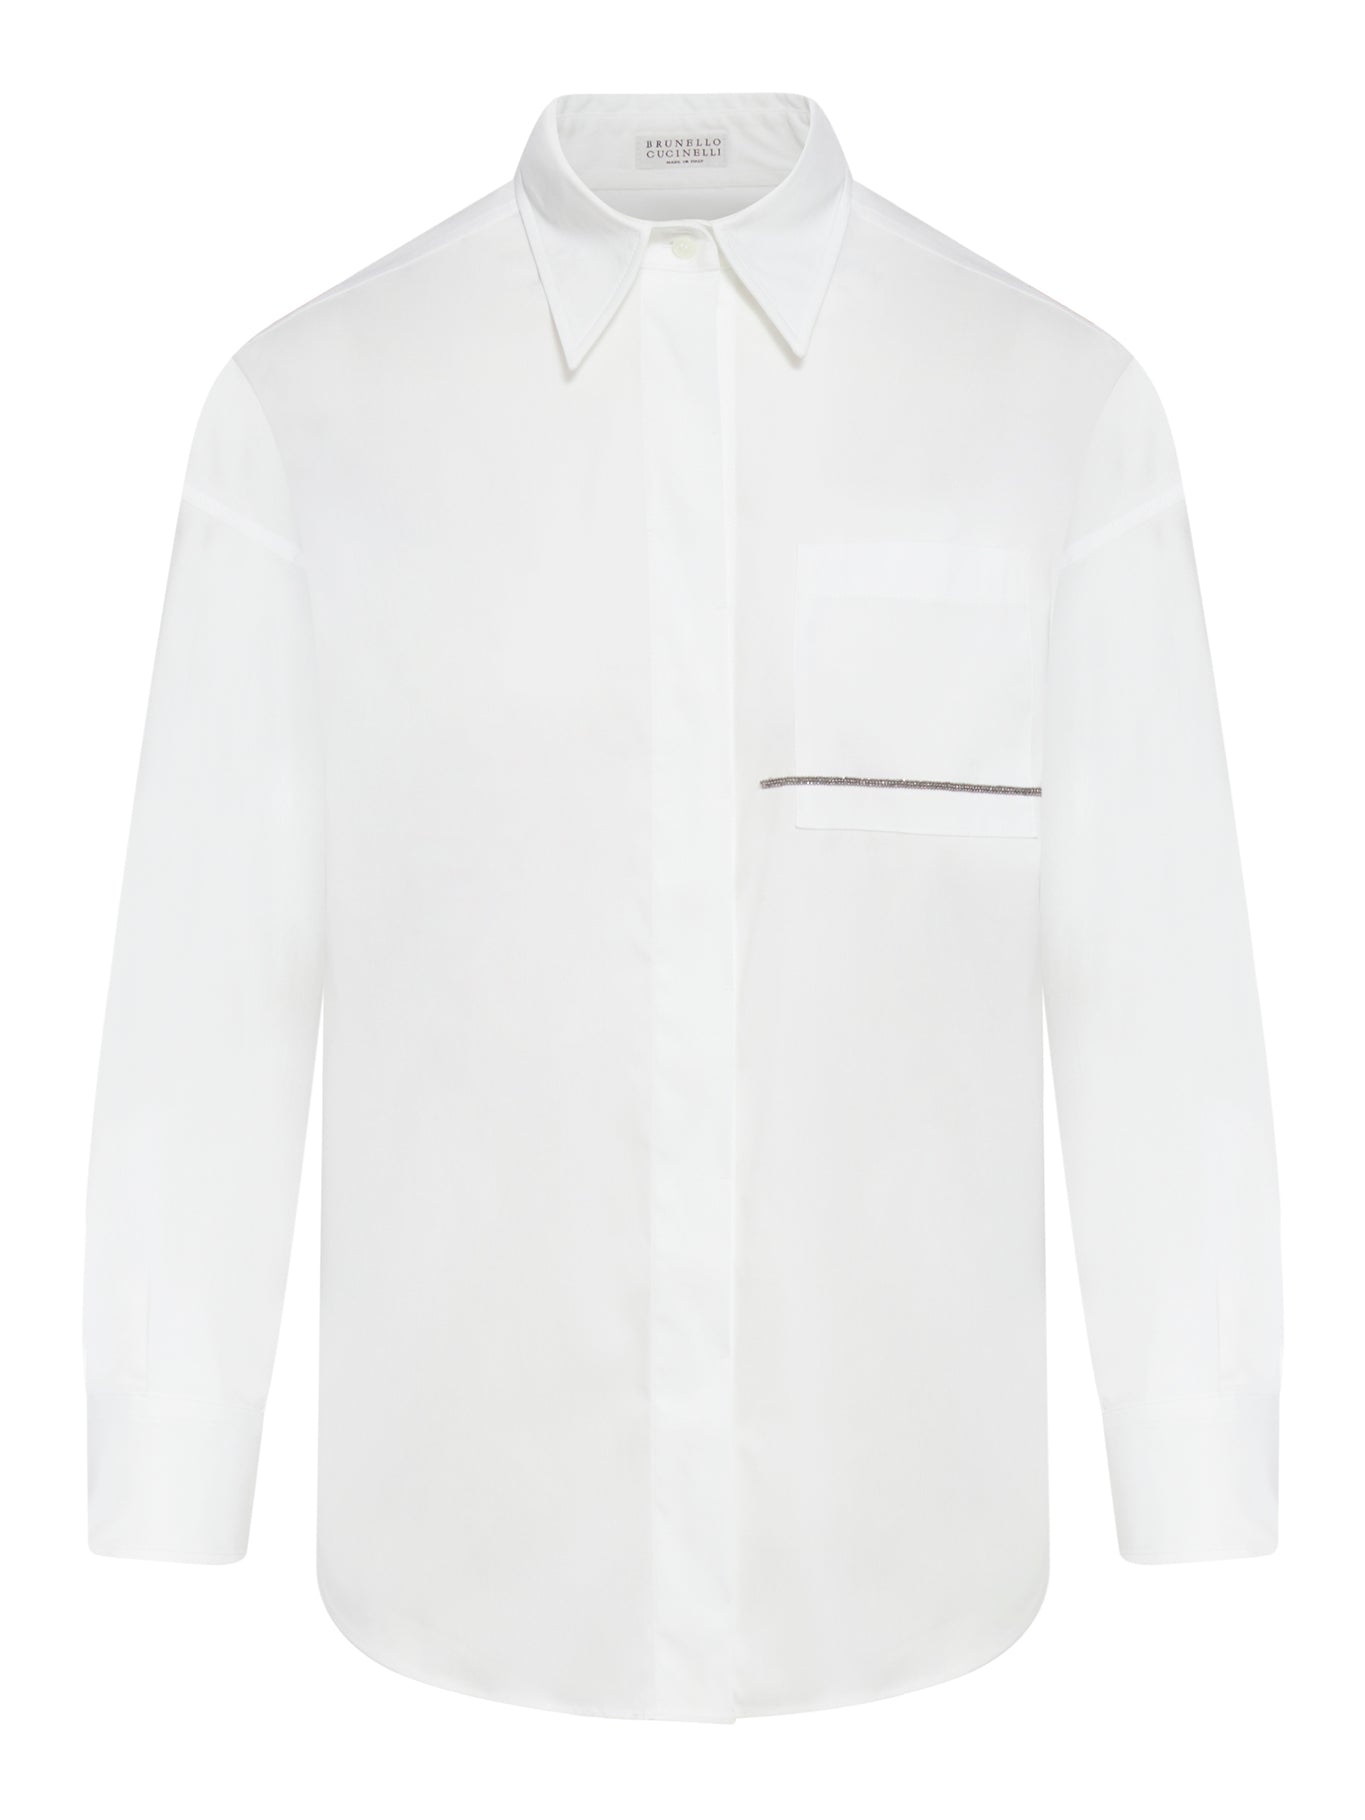 SHIRT WITH FRONT DETAIL